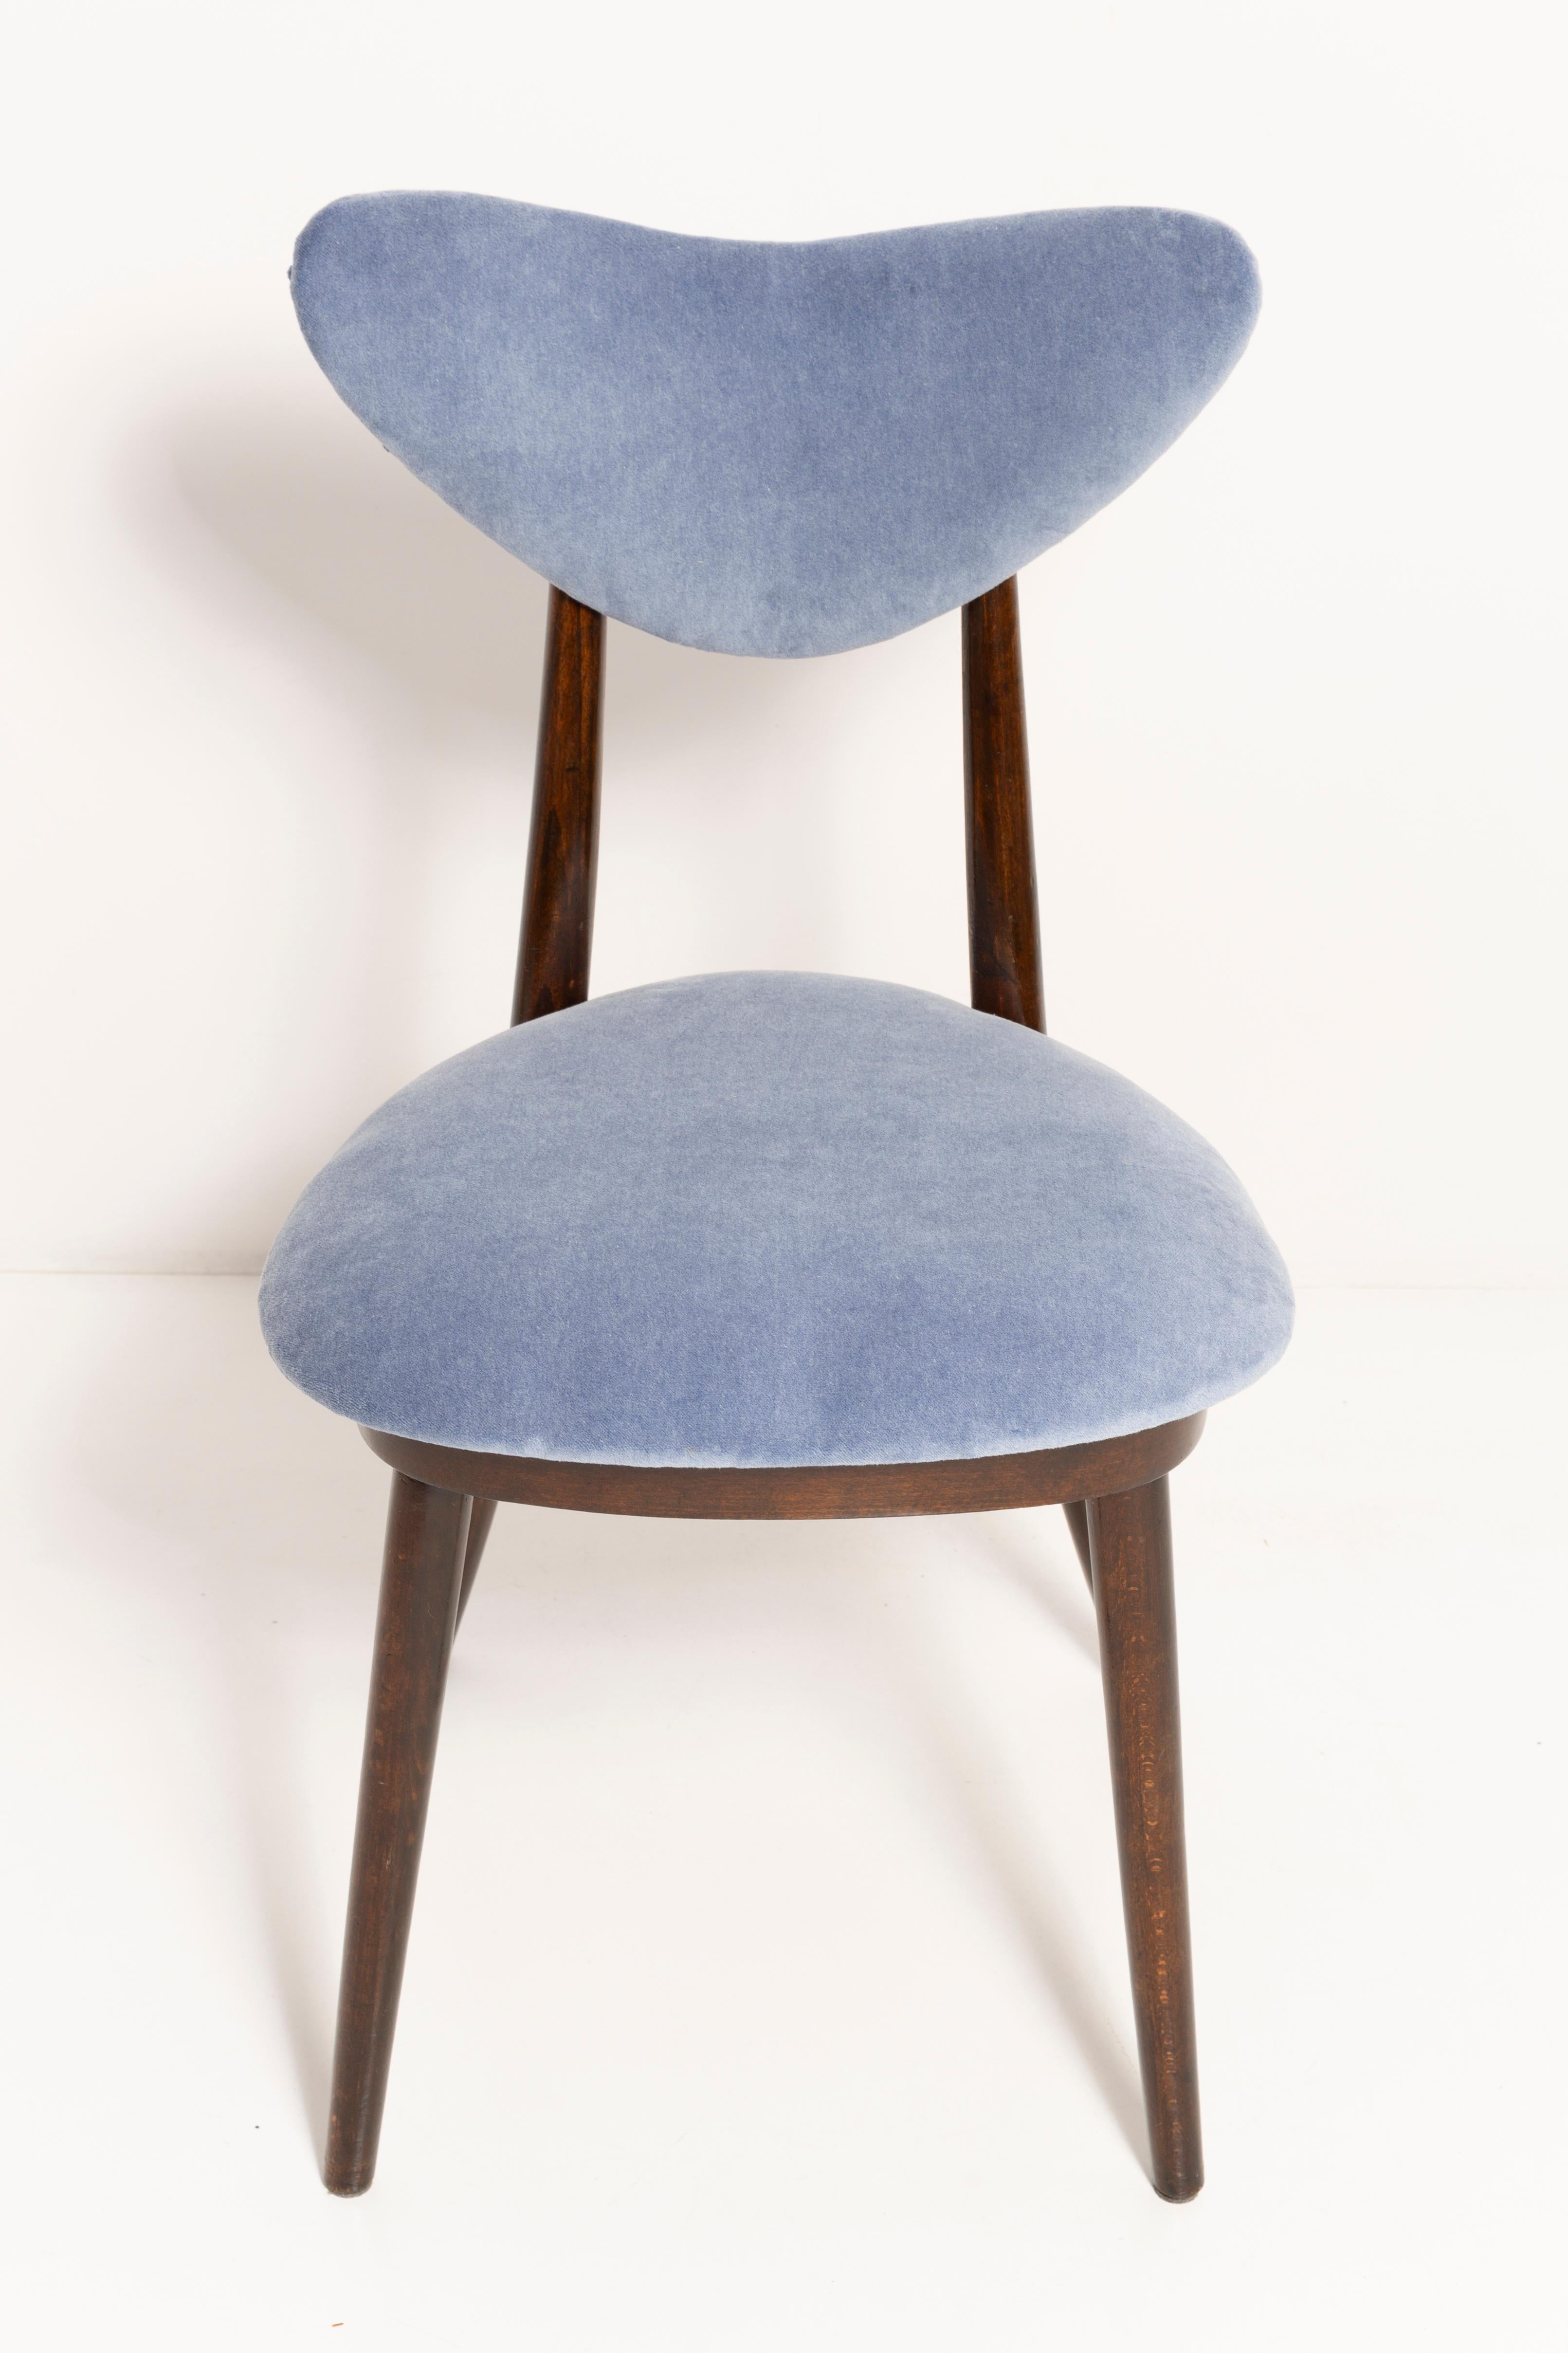 Hand-Crafted Mid Century Violet Blue Heart Cotton-Velvet Chair, Europe, 1960s For Sale